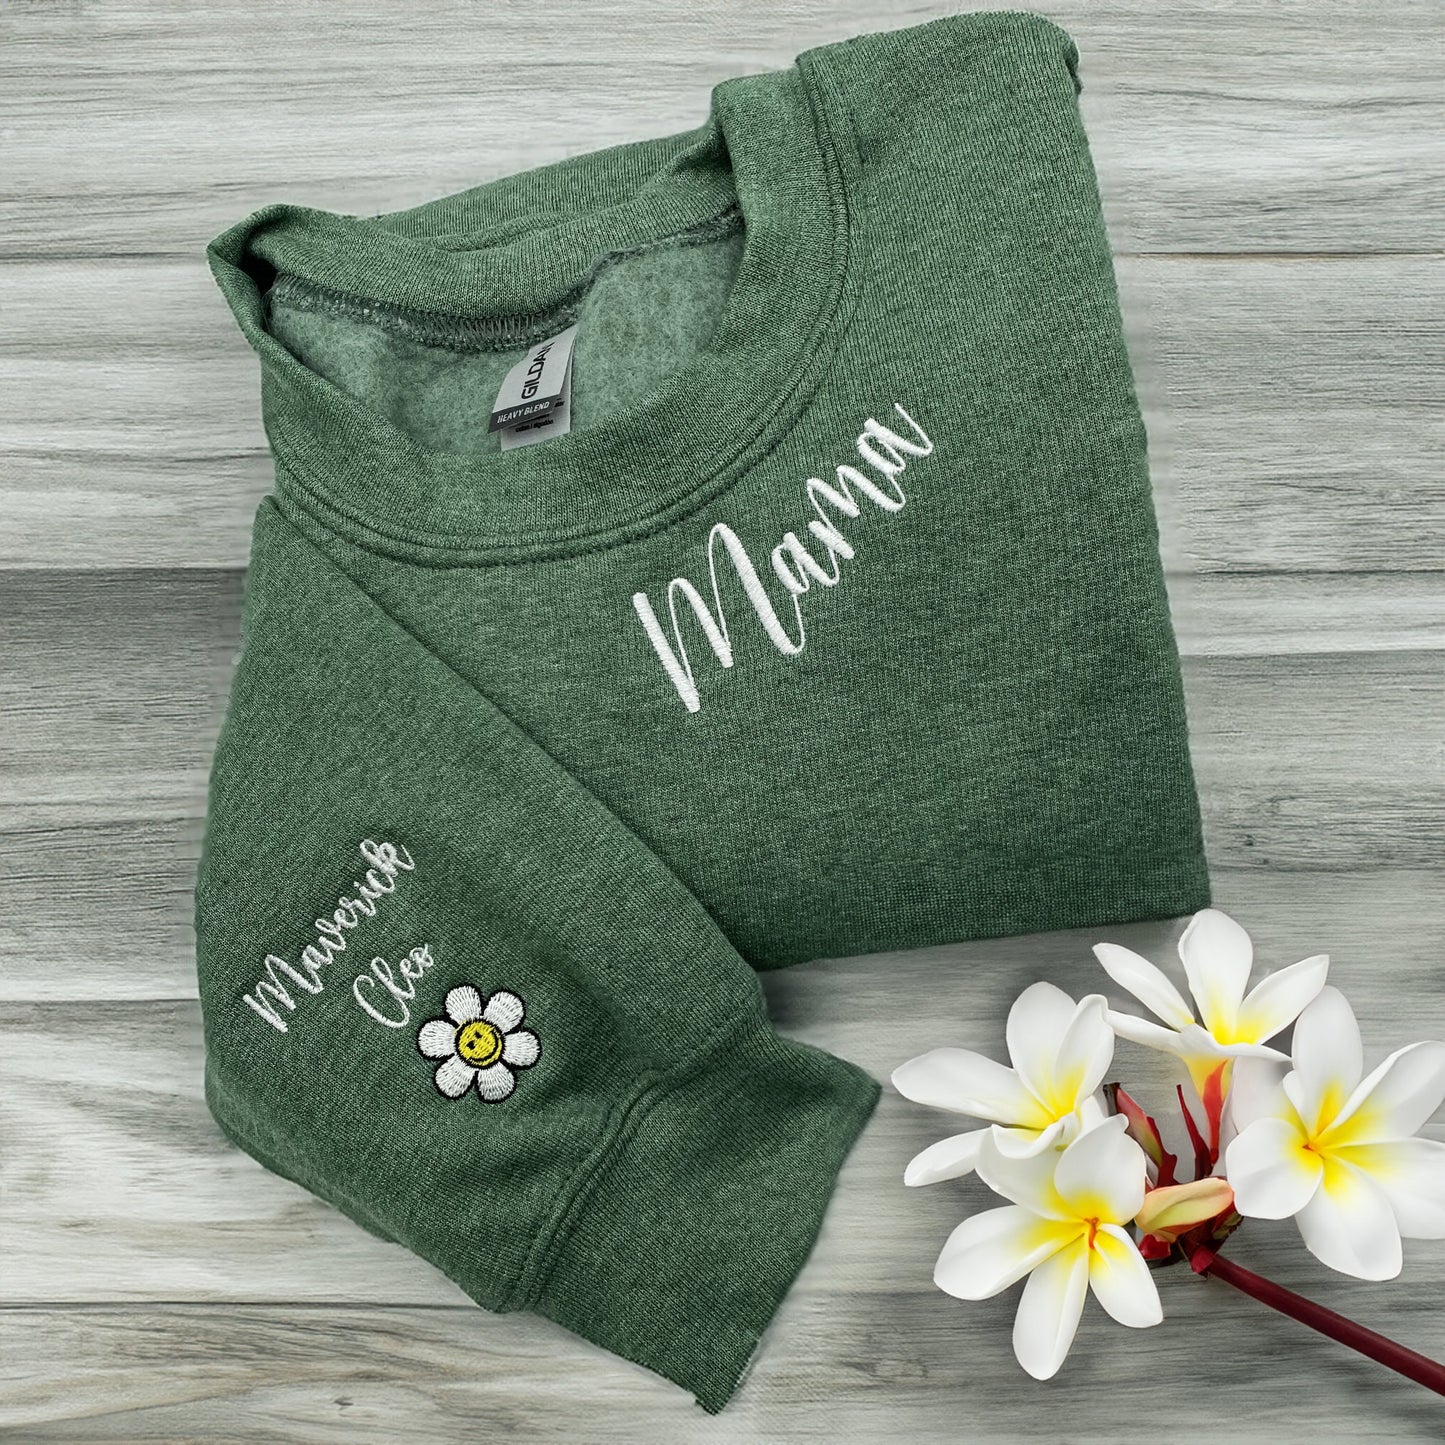 Embroidered 'Mama' Collar Sweatshirt with Kids' Names & Icon - Unique Family Gift